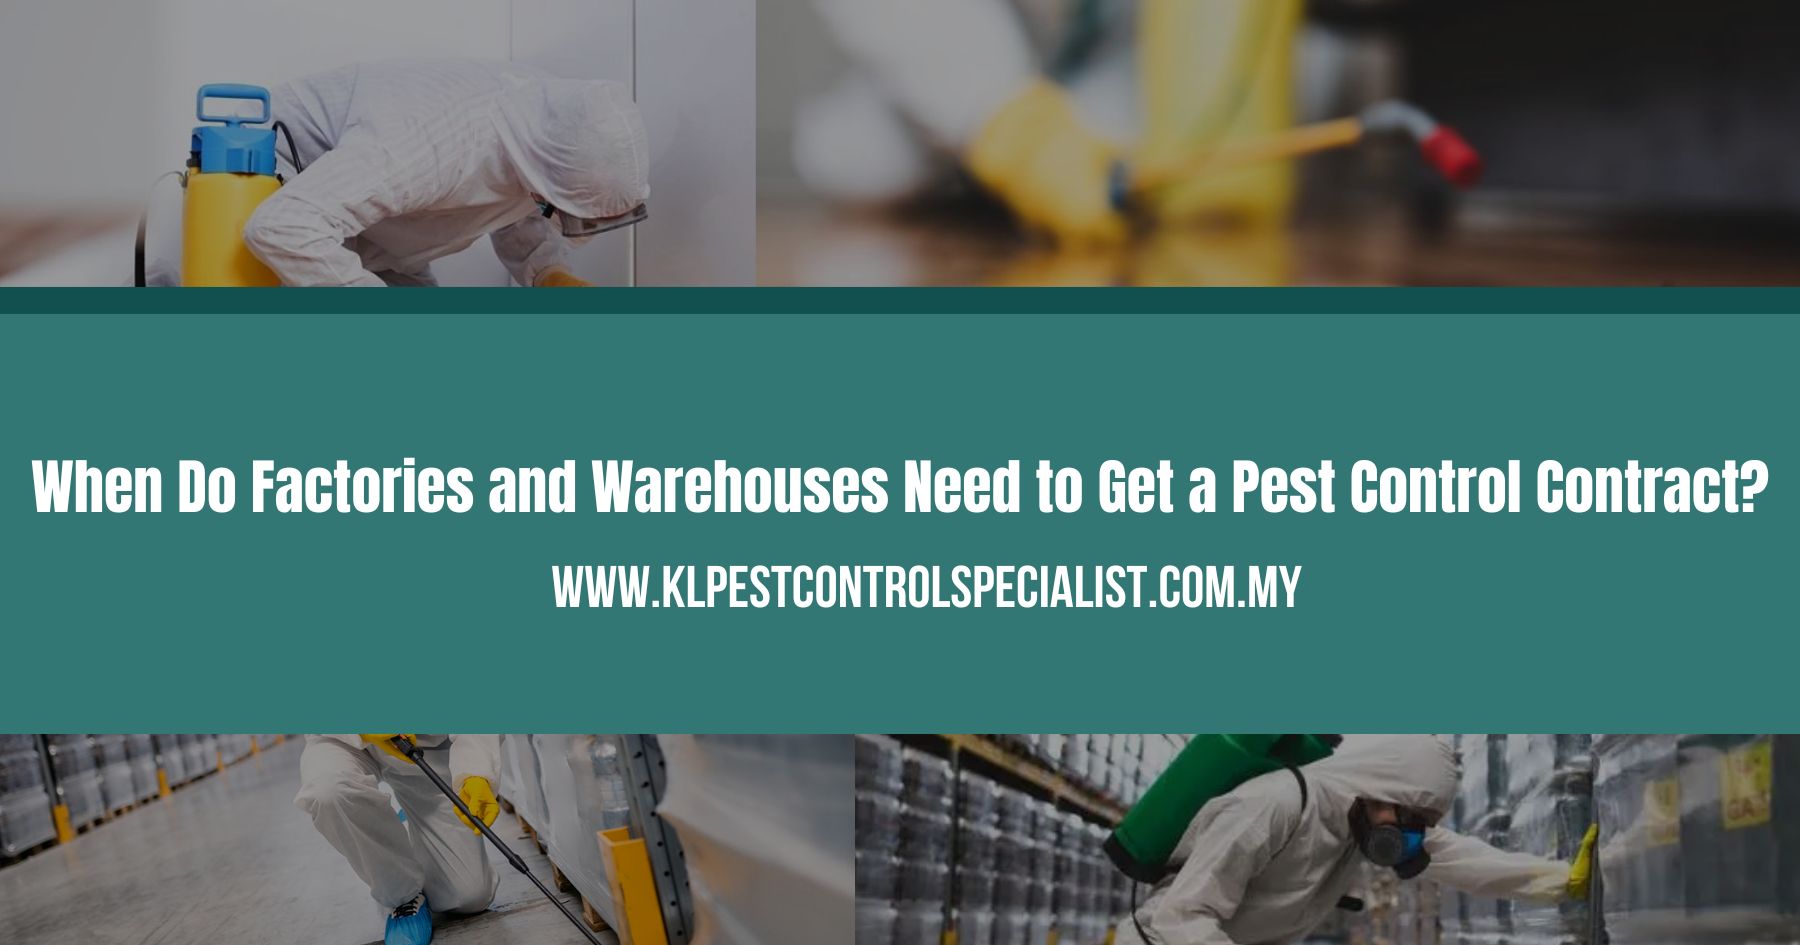 When Do Factories and Warehouses Need to Get a Pest Control Contract?